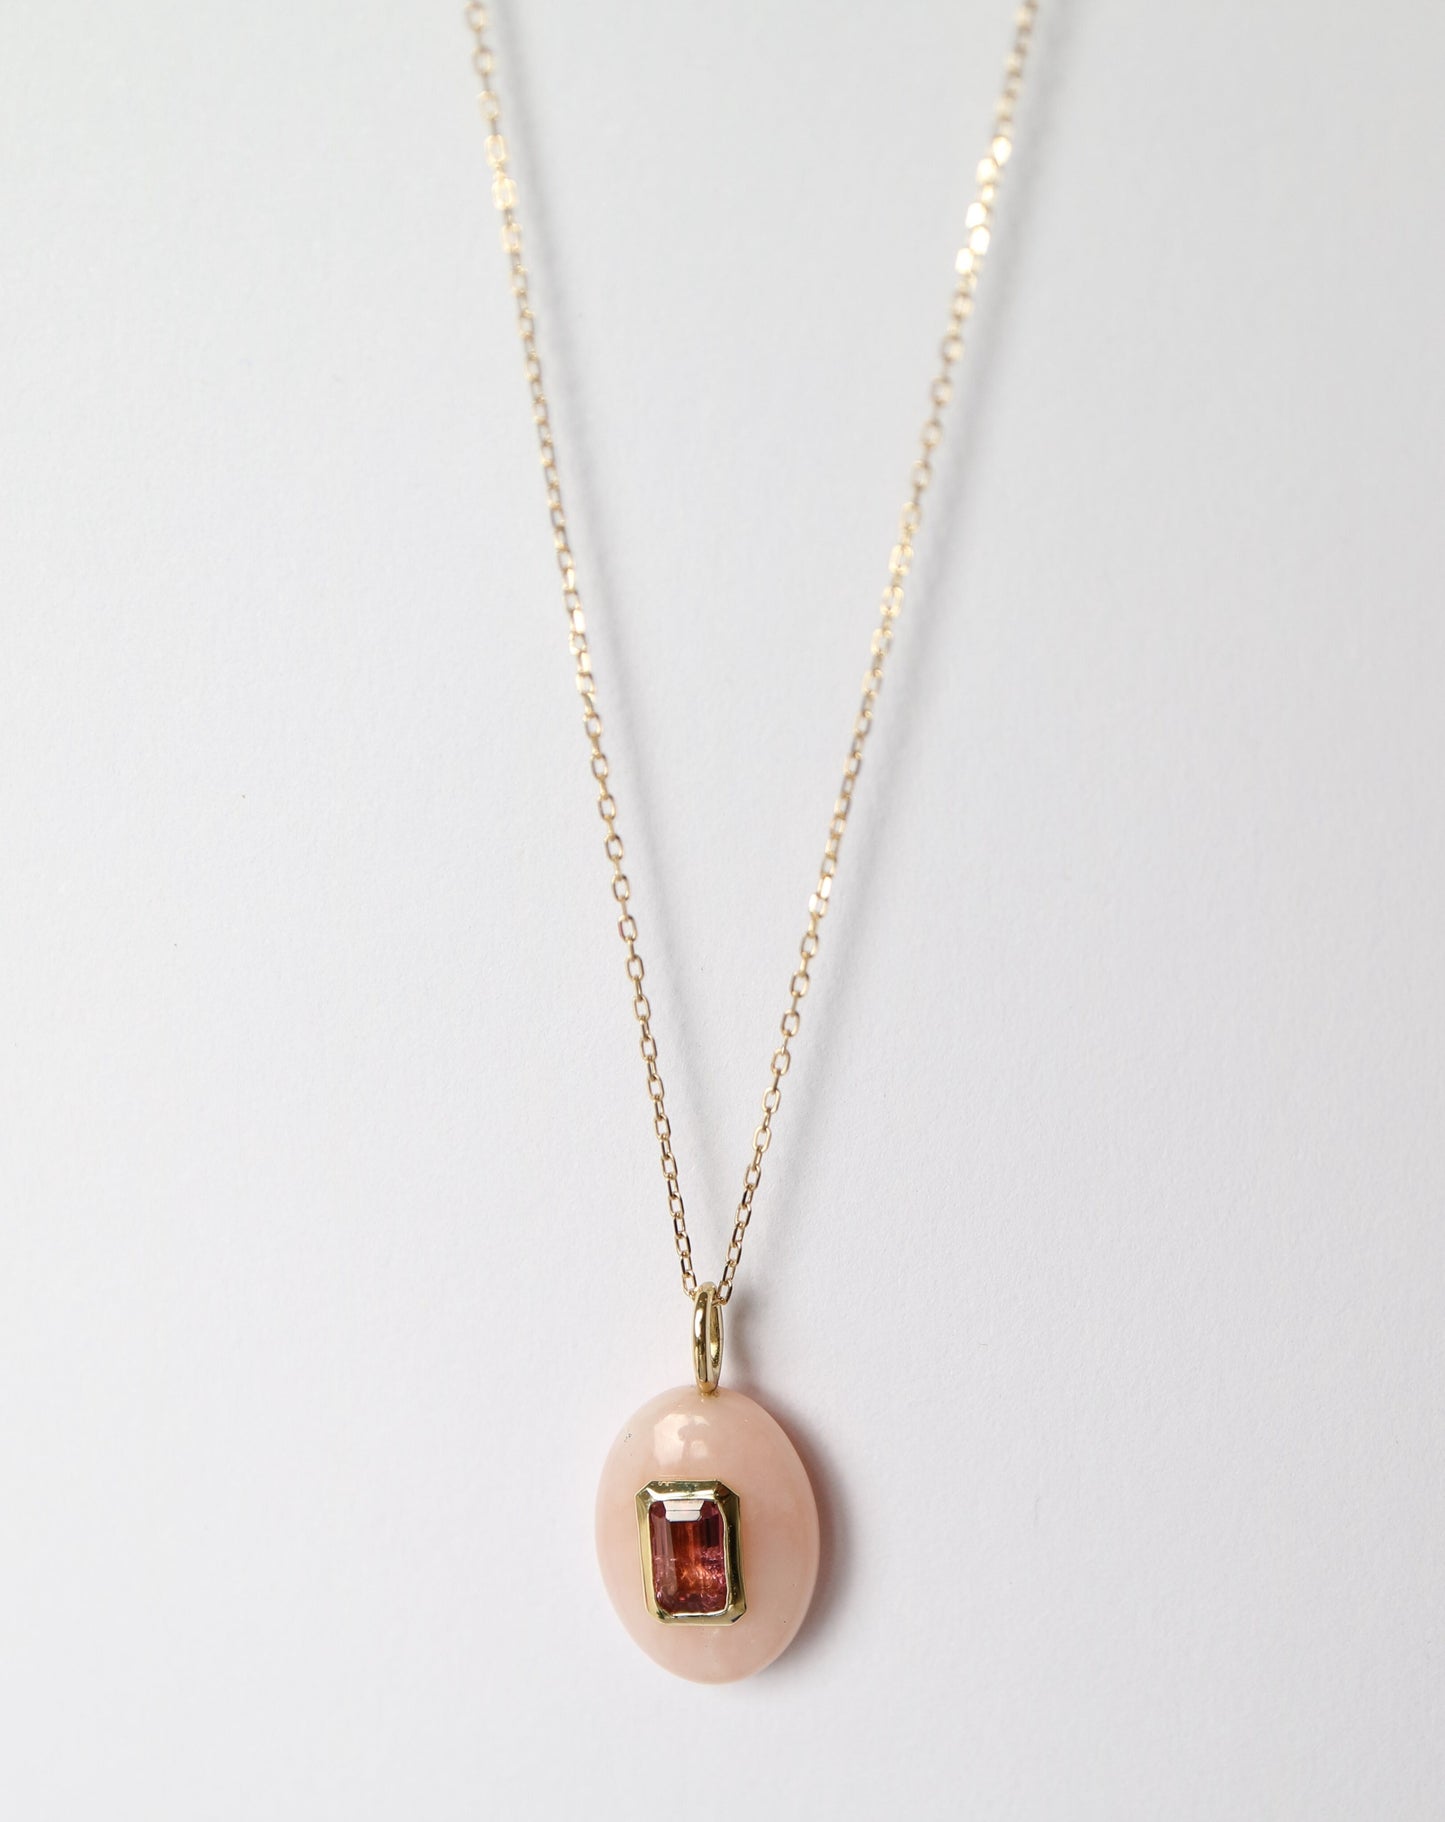 Gold and tourmaline oval pendant